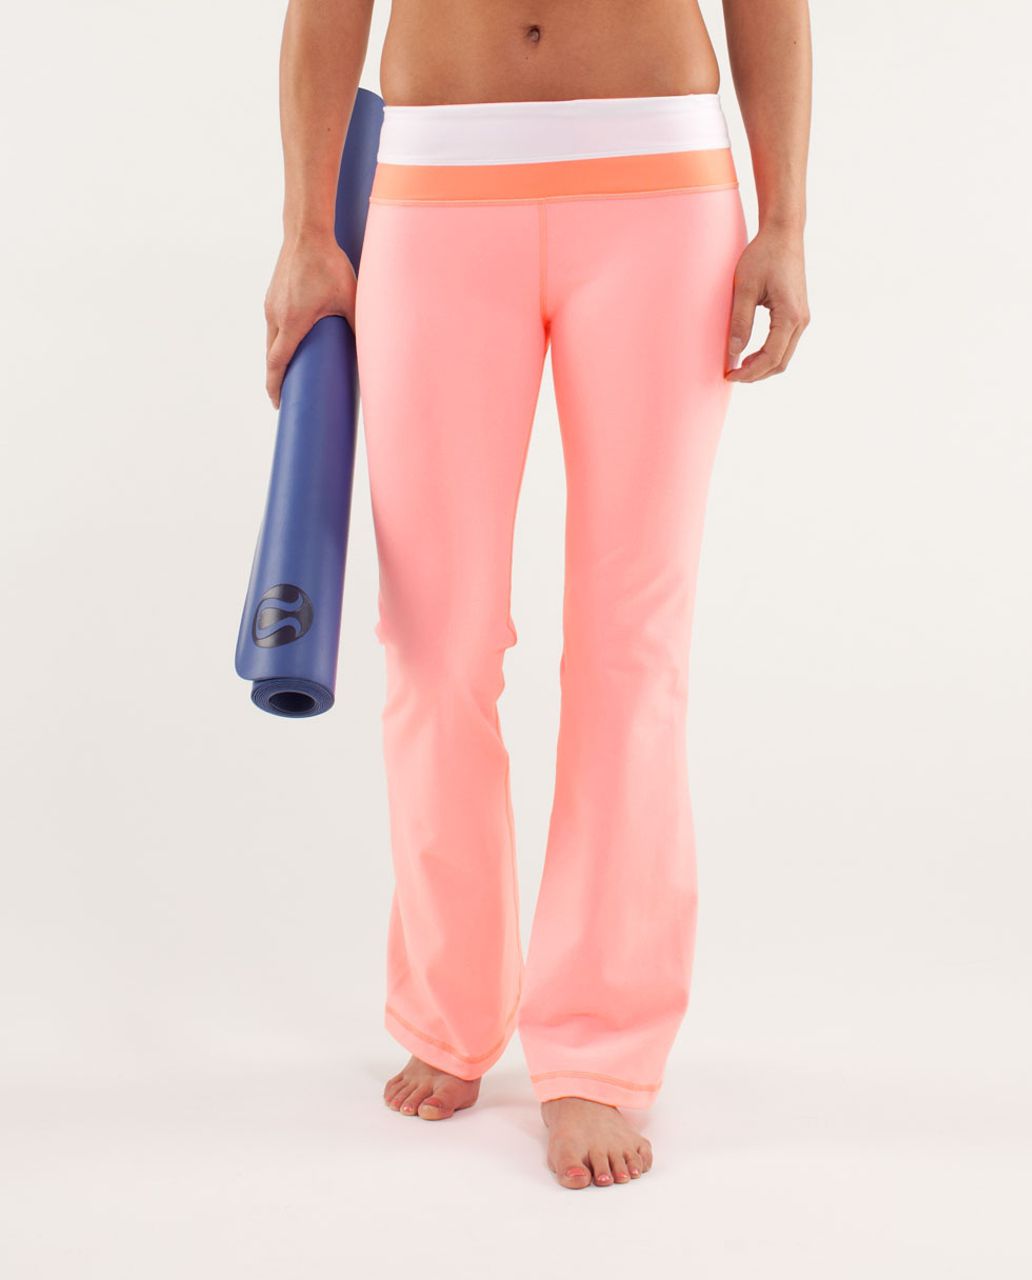 Lululemon Groove Pant *New (Tall) - Bleached Coral / White / Pop Orange